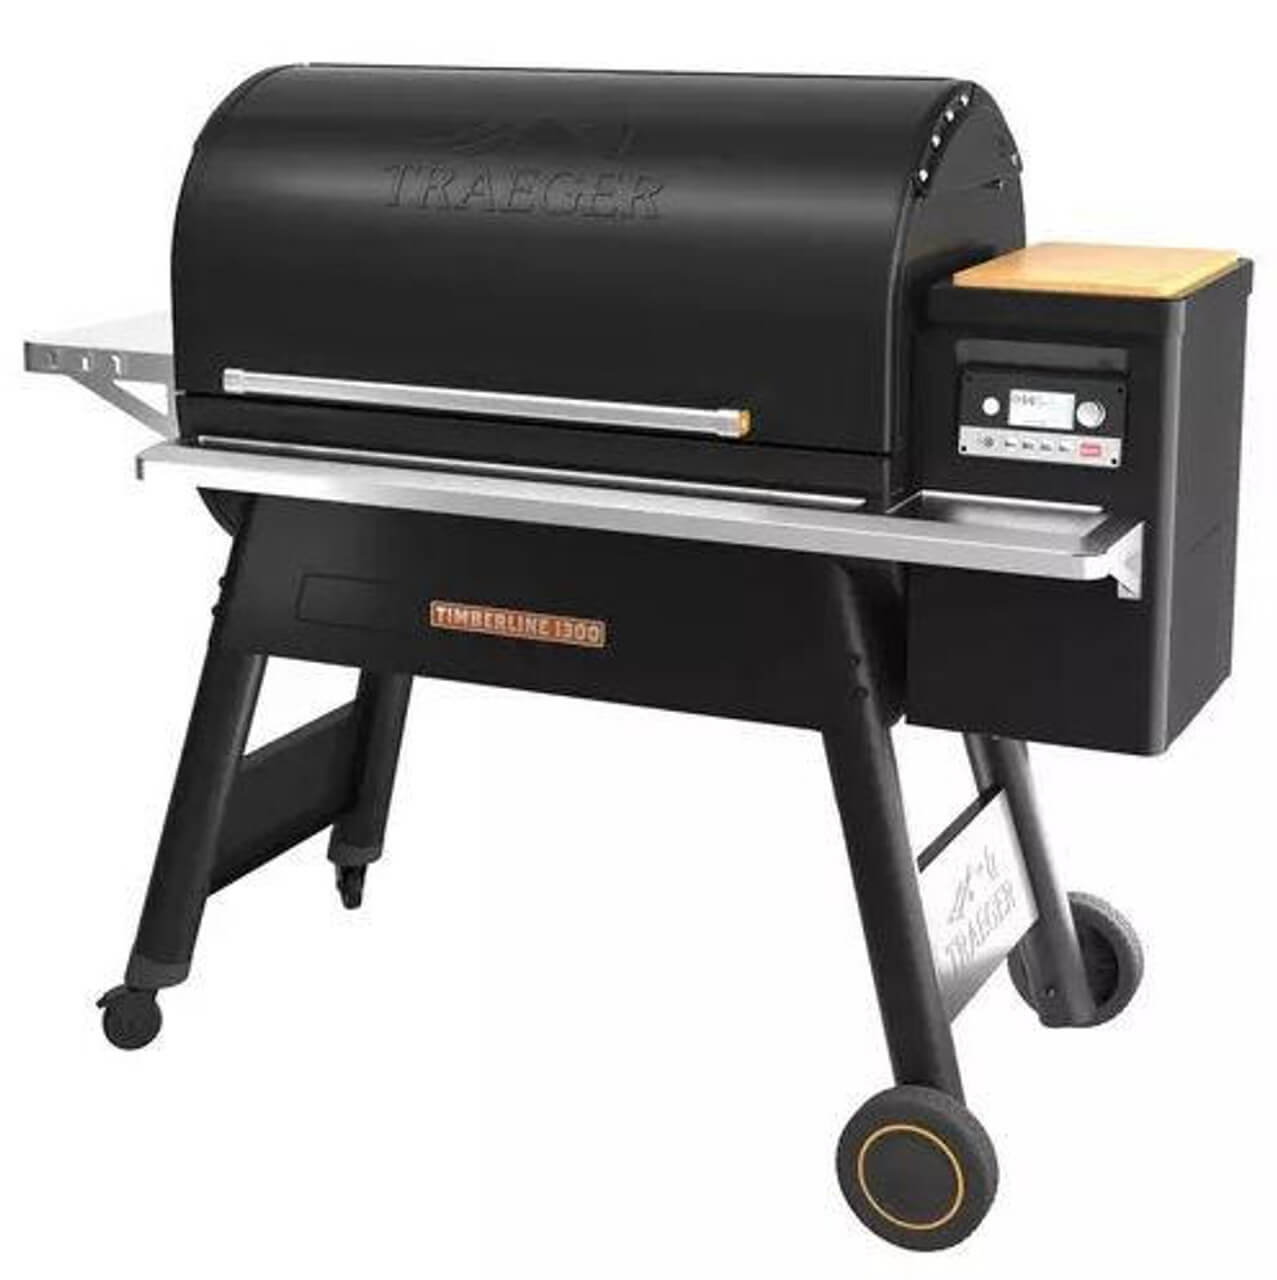 12 Best Small Gas Grills For Your Winter Homegate Party